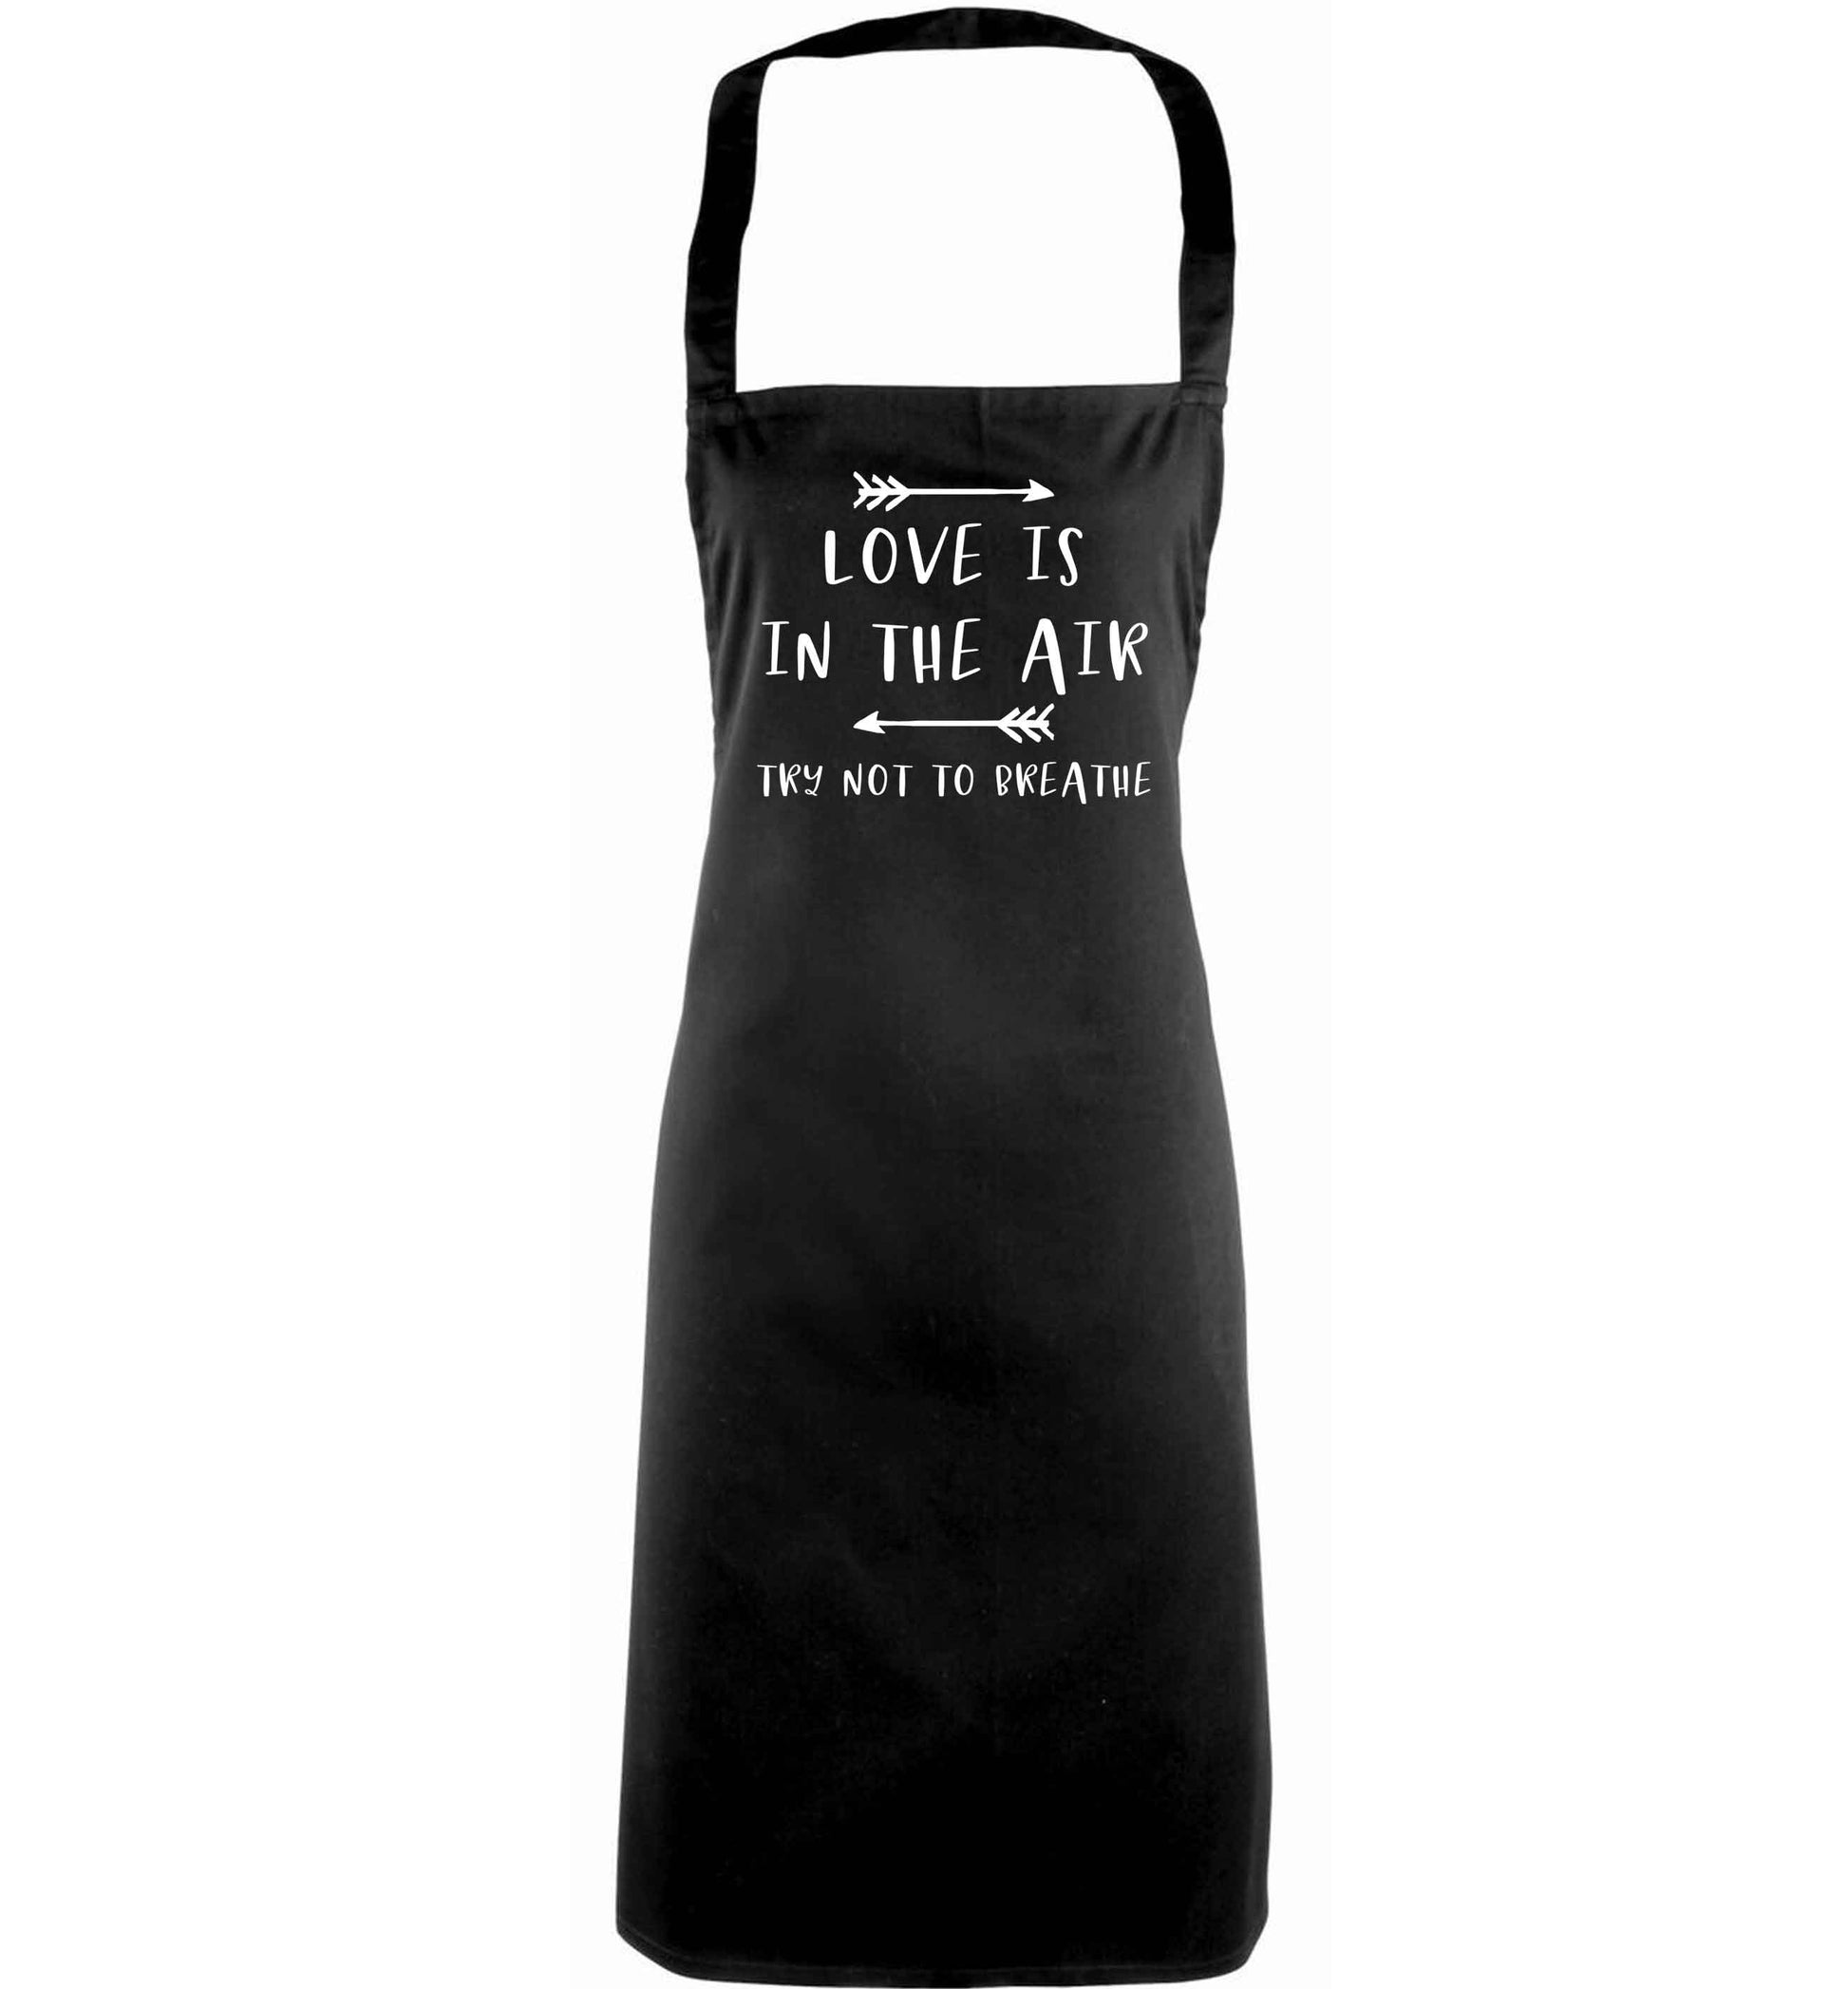 Love is in the air try not to breathe adults black apron